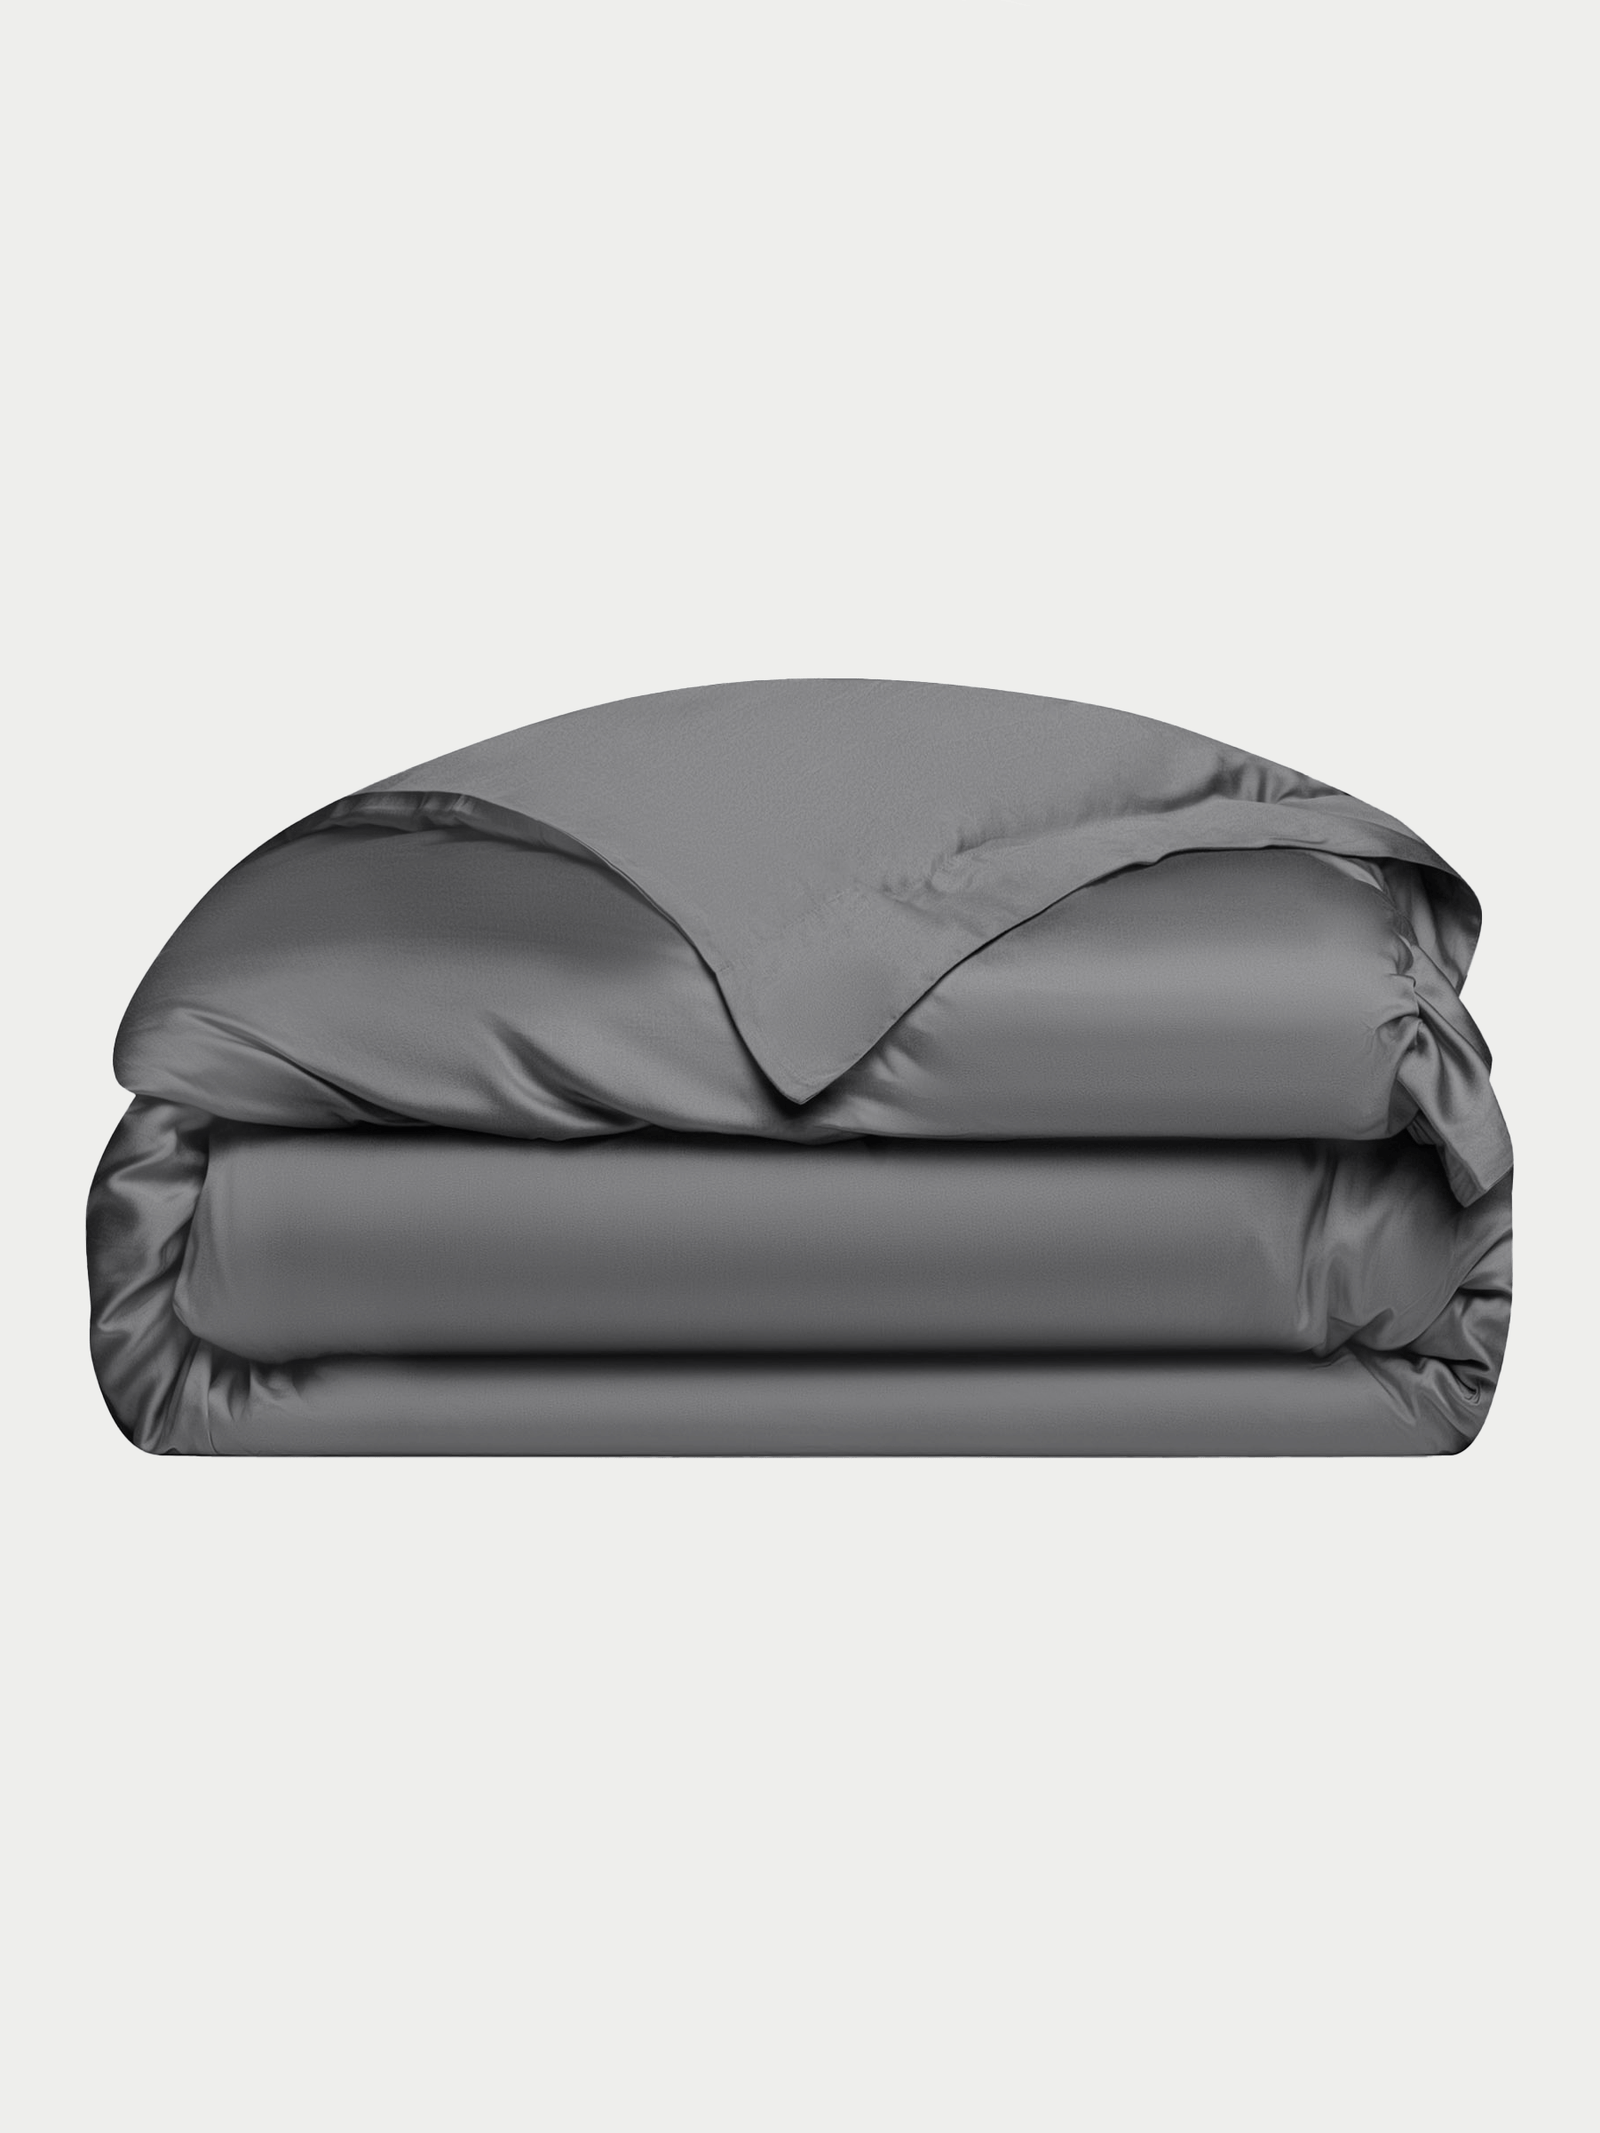 Charcoal duvet cover folded with white background 